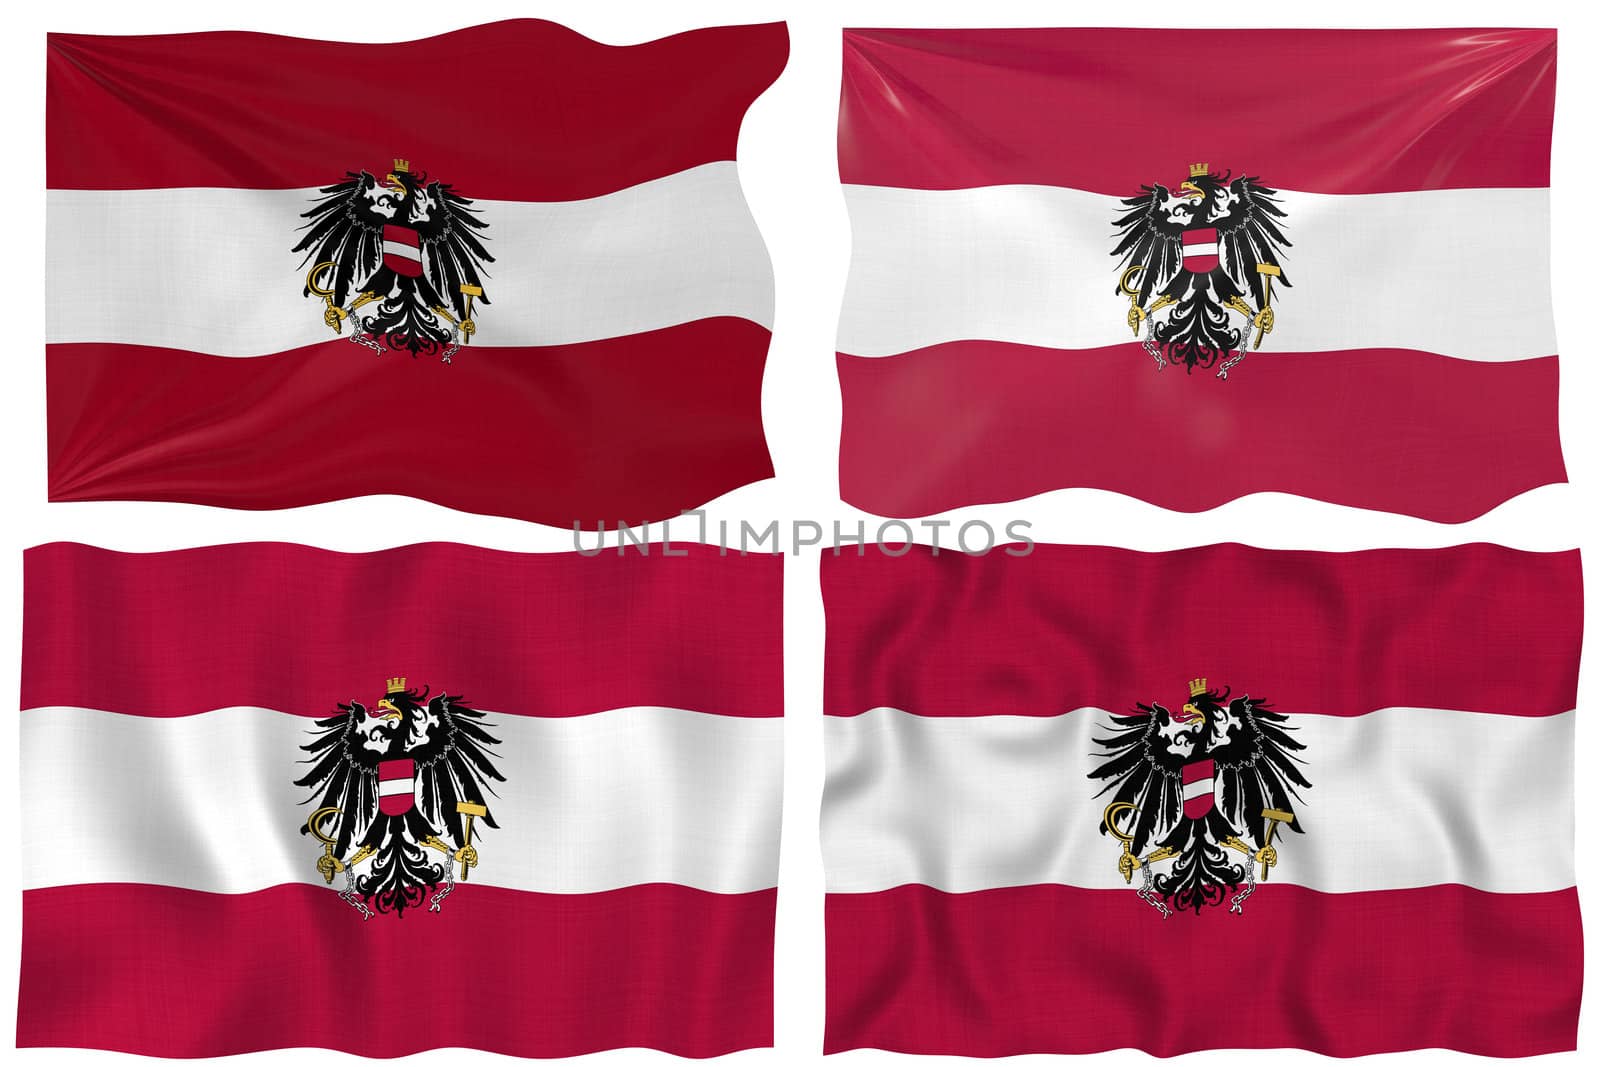 Great Image of the Flag of Austria